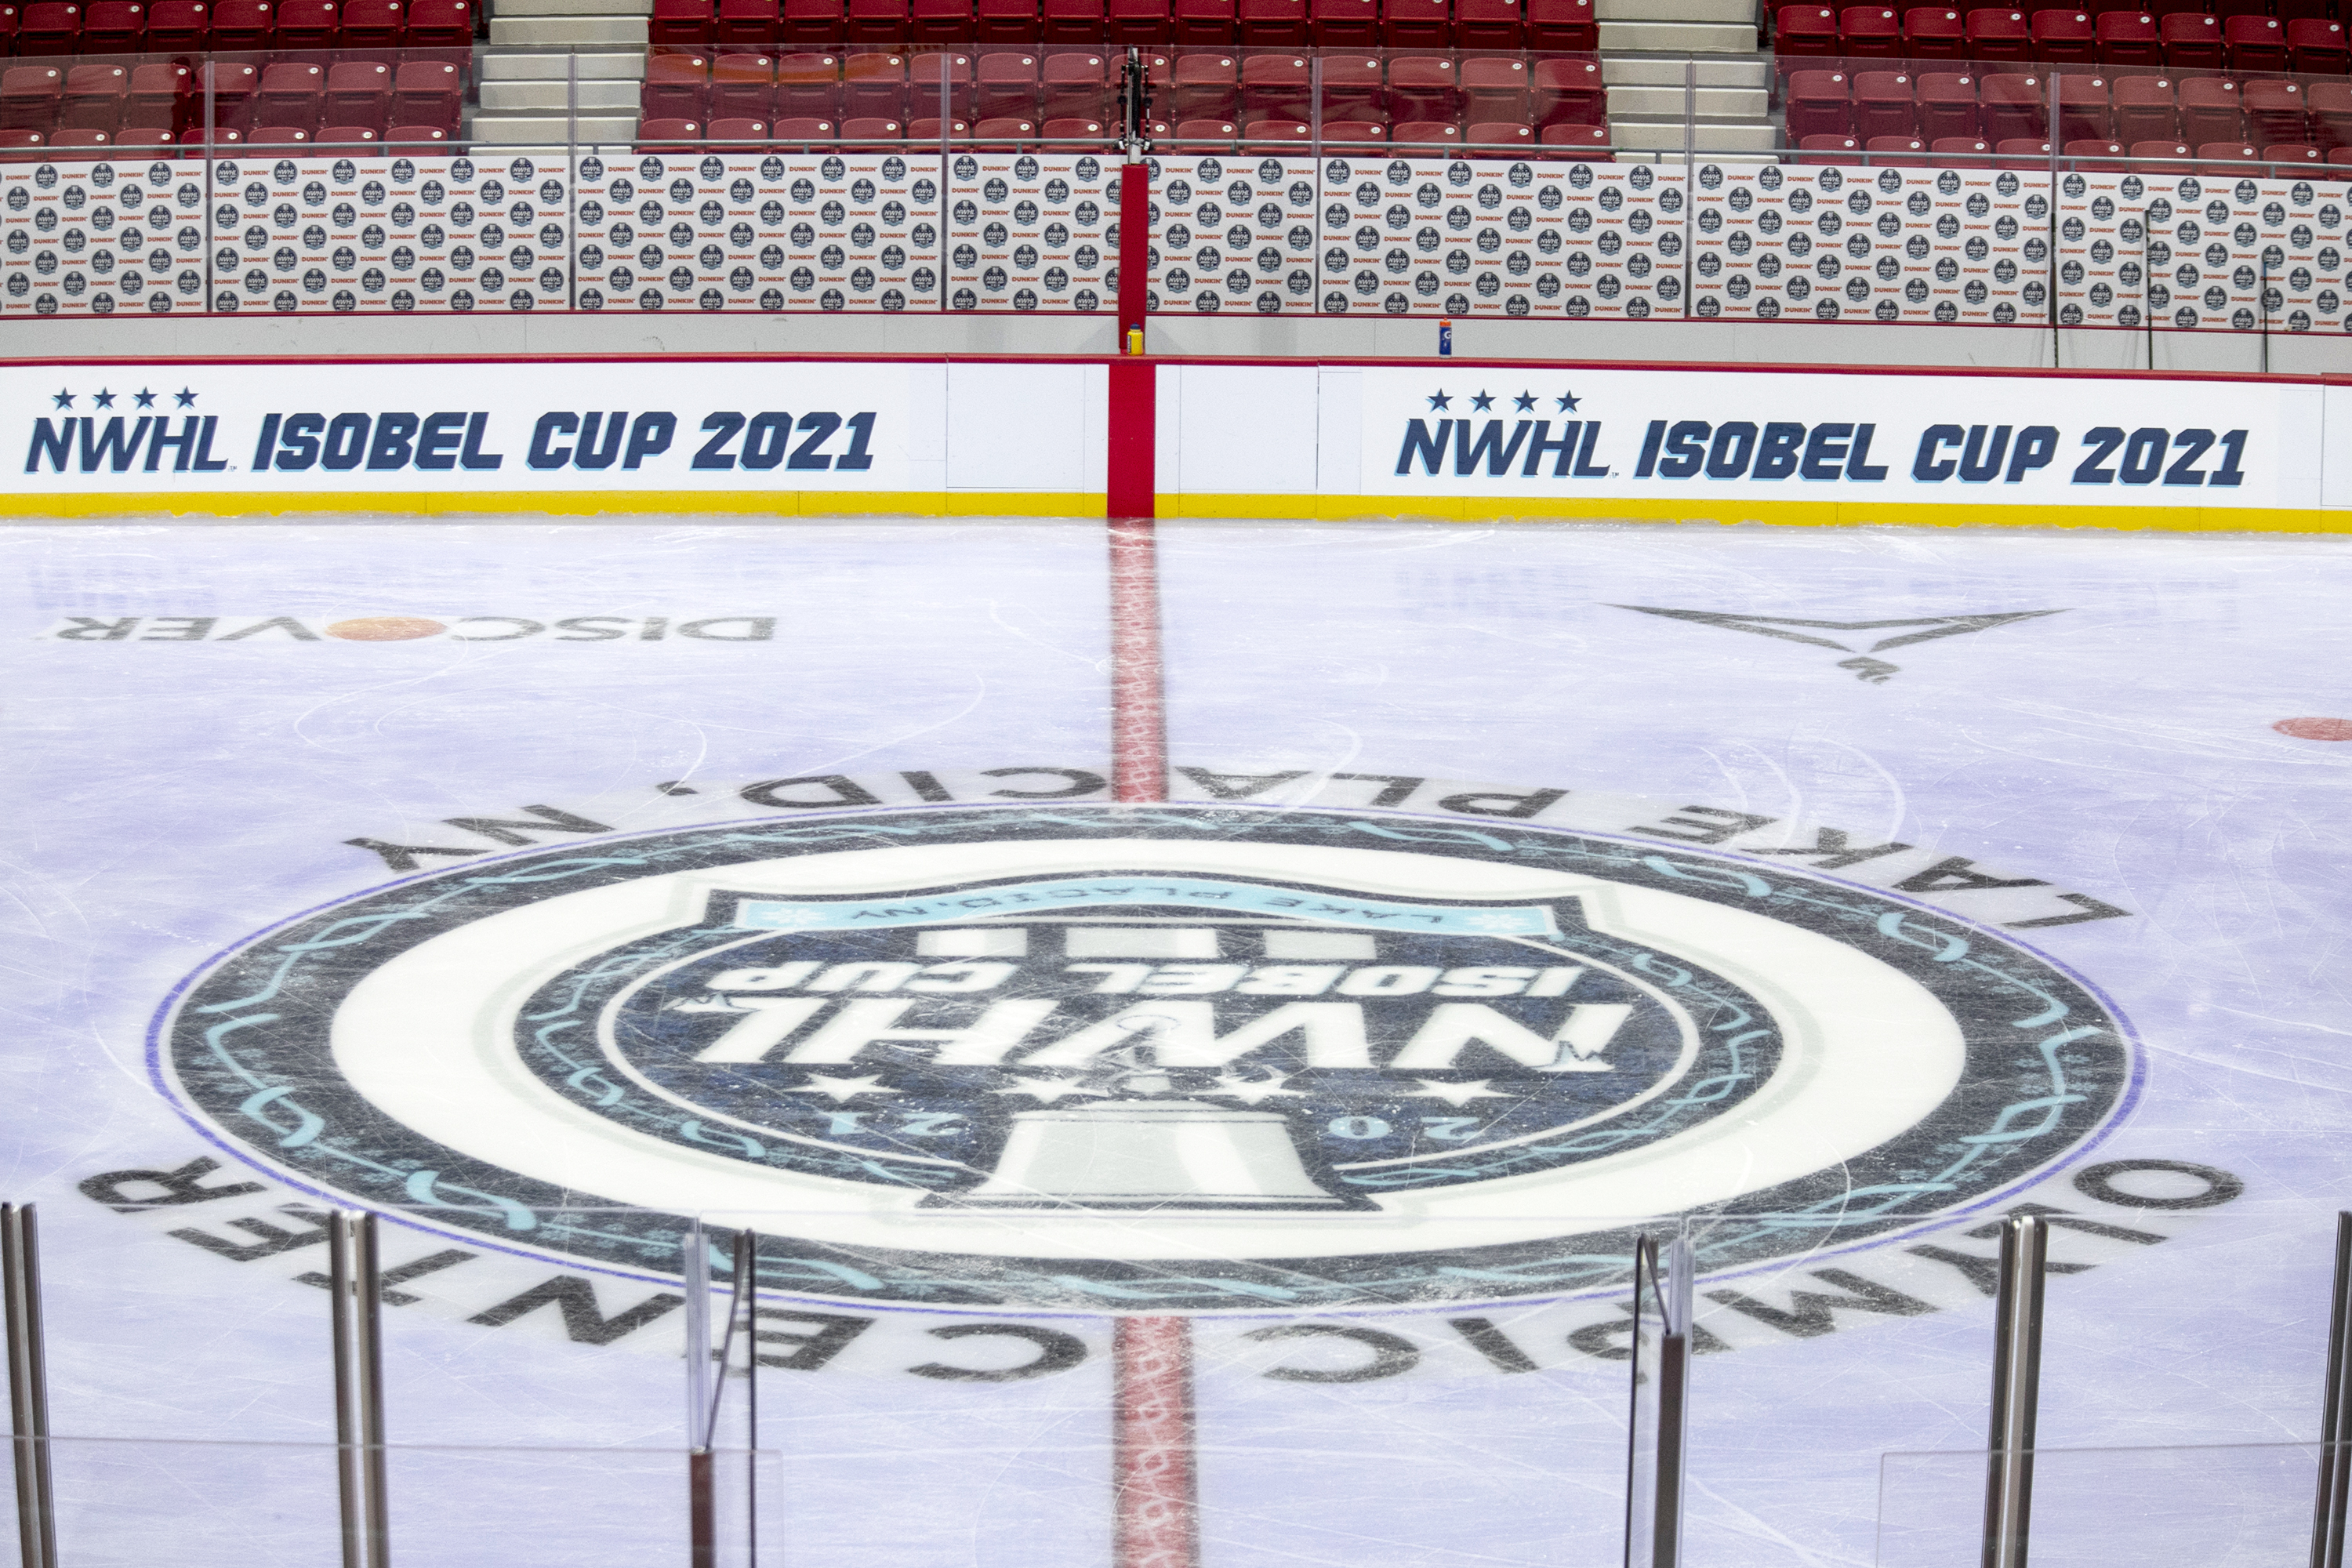 The NWHL logo on the ice at the 1980 Rink-Herb Brooks Arena in Lake Placid, NY on Jan. 22, 2021.